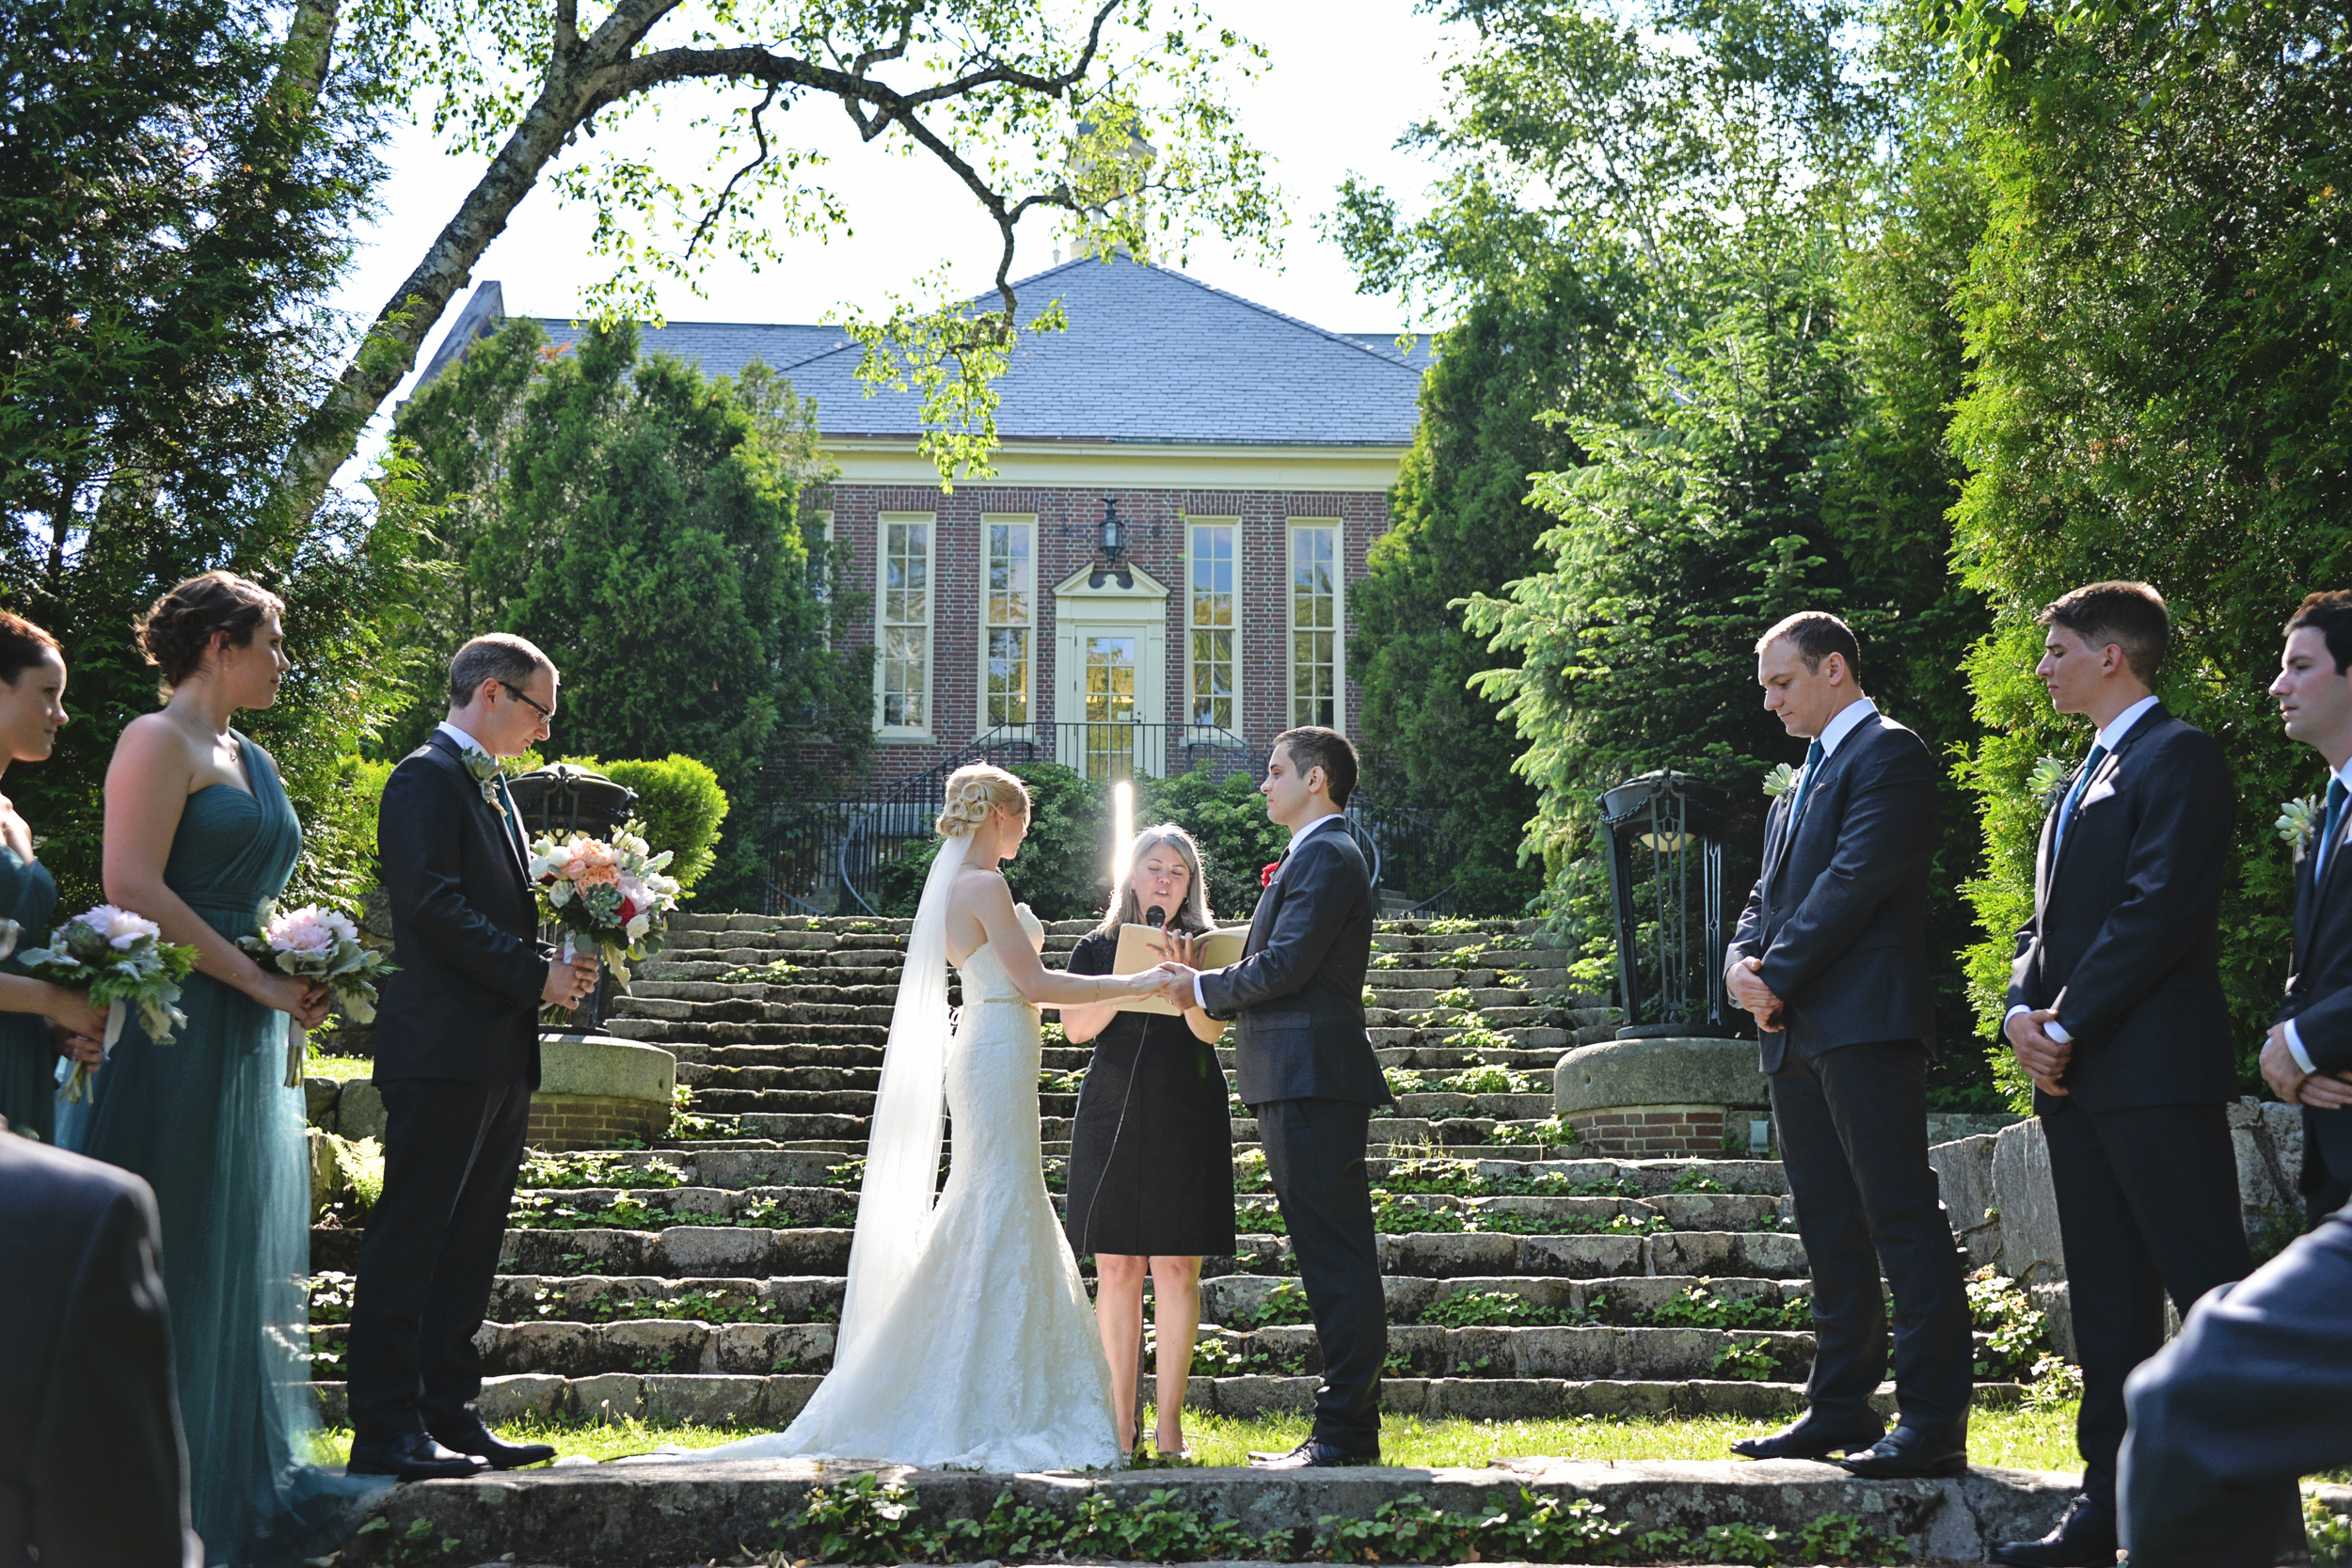 Maine Wedding Venues On A Tight Budget A Sweet Start